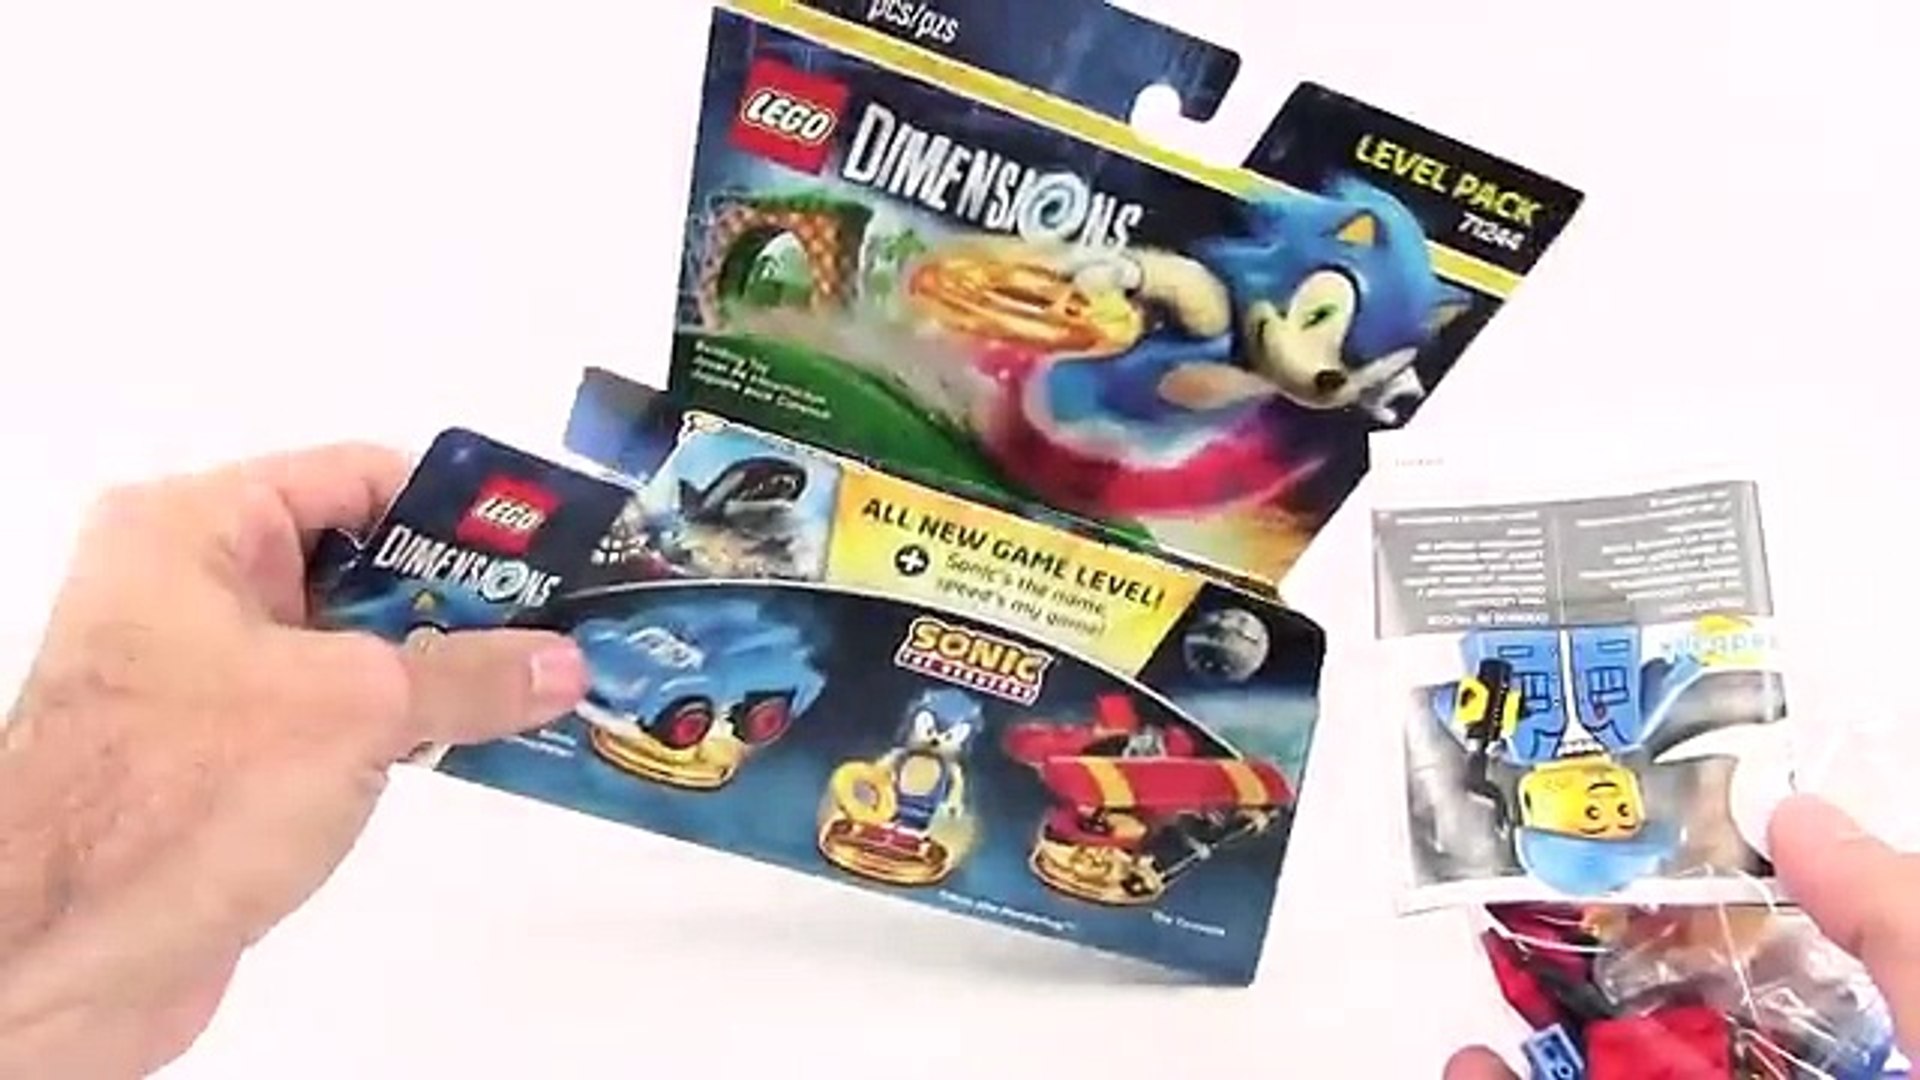 Lego Dimensions: Sonic the Hedgehog LEVEL Pack #71244 Unboxing, Speed Build  & Gameplay - H - video Dailymotion